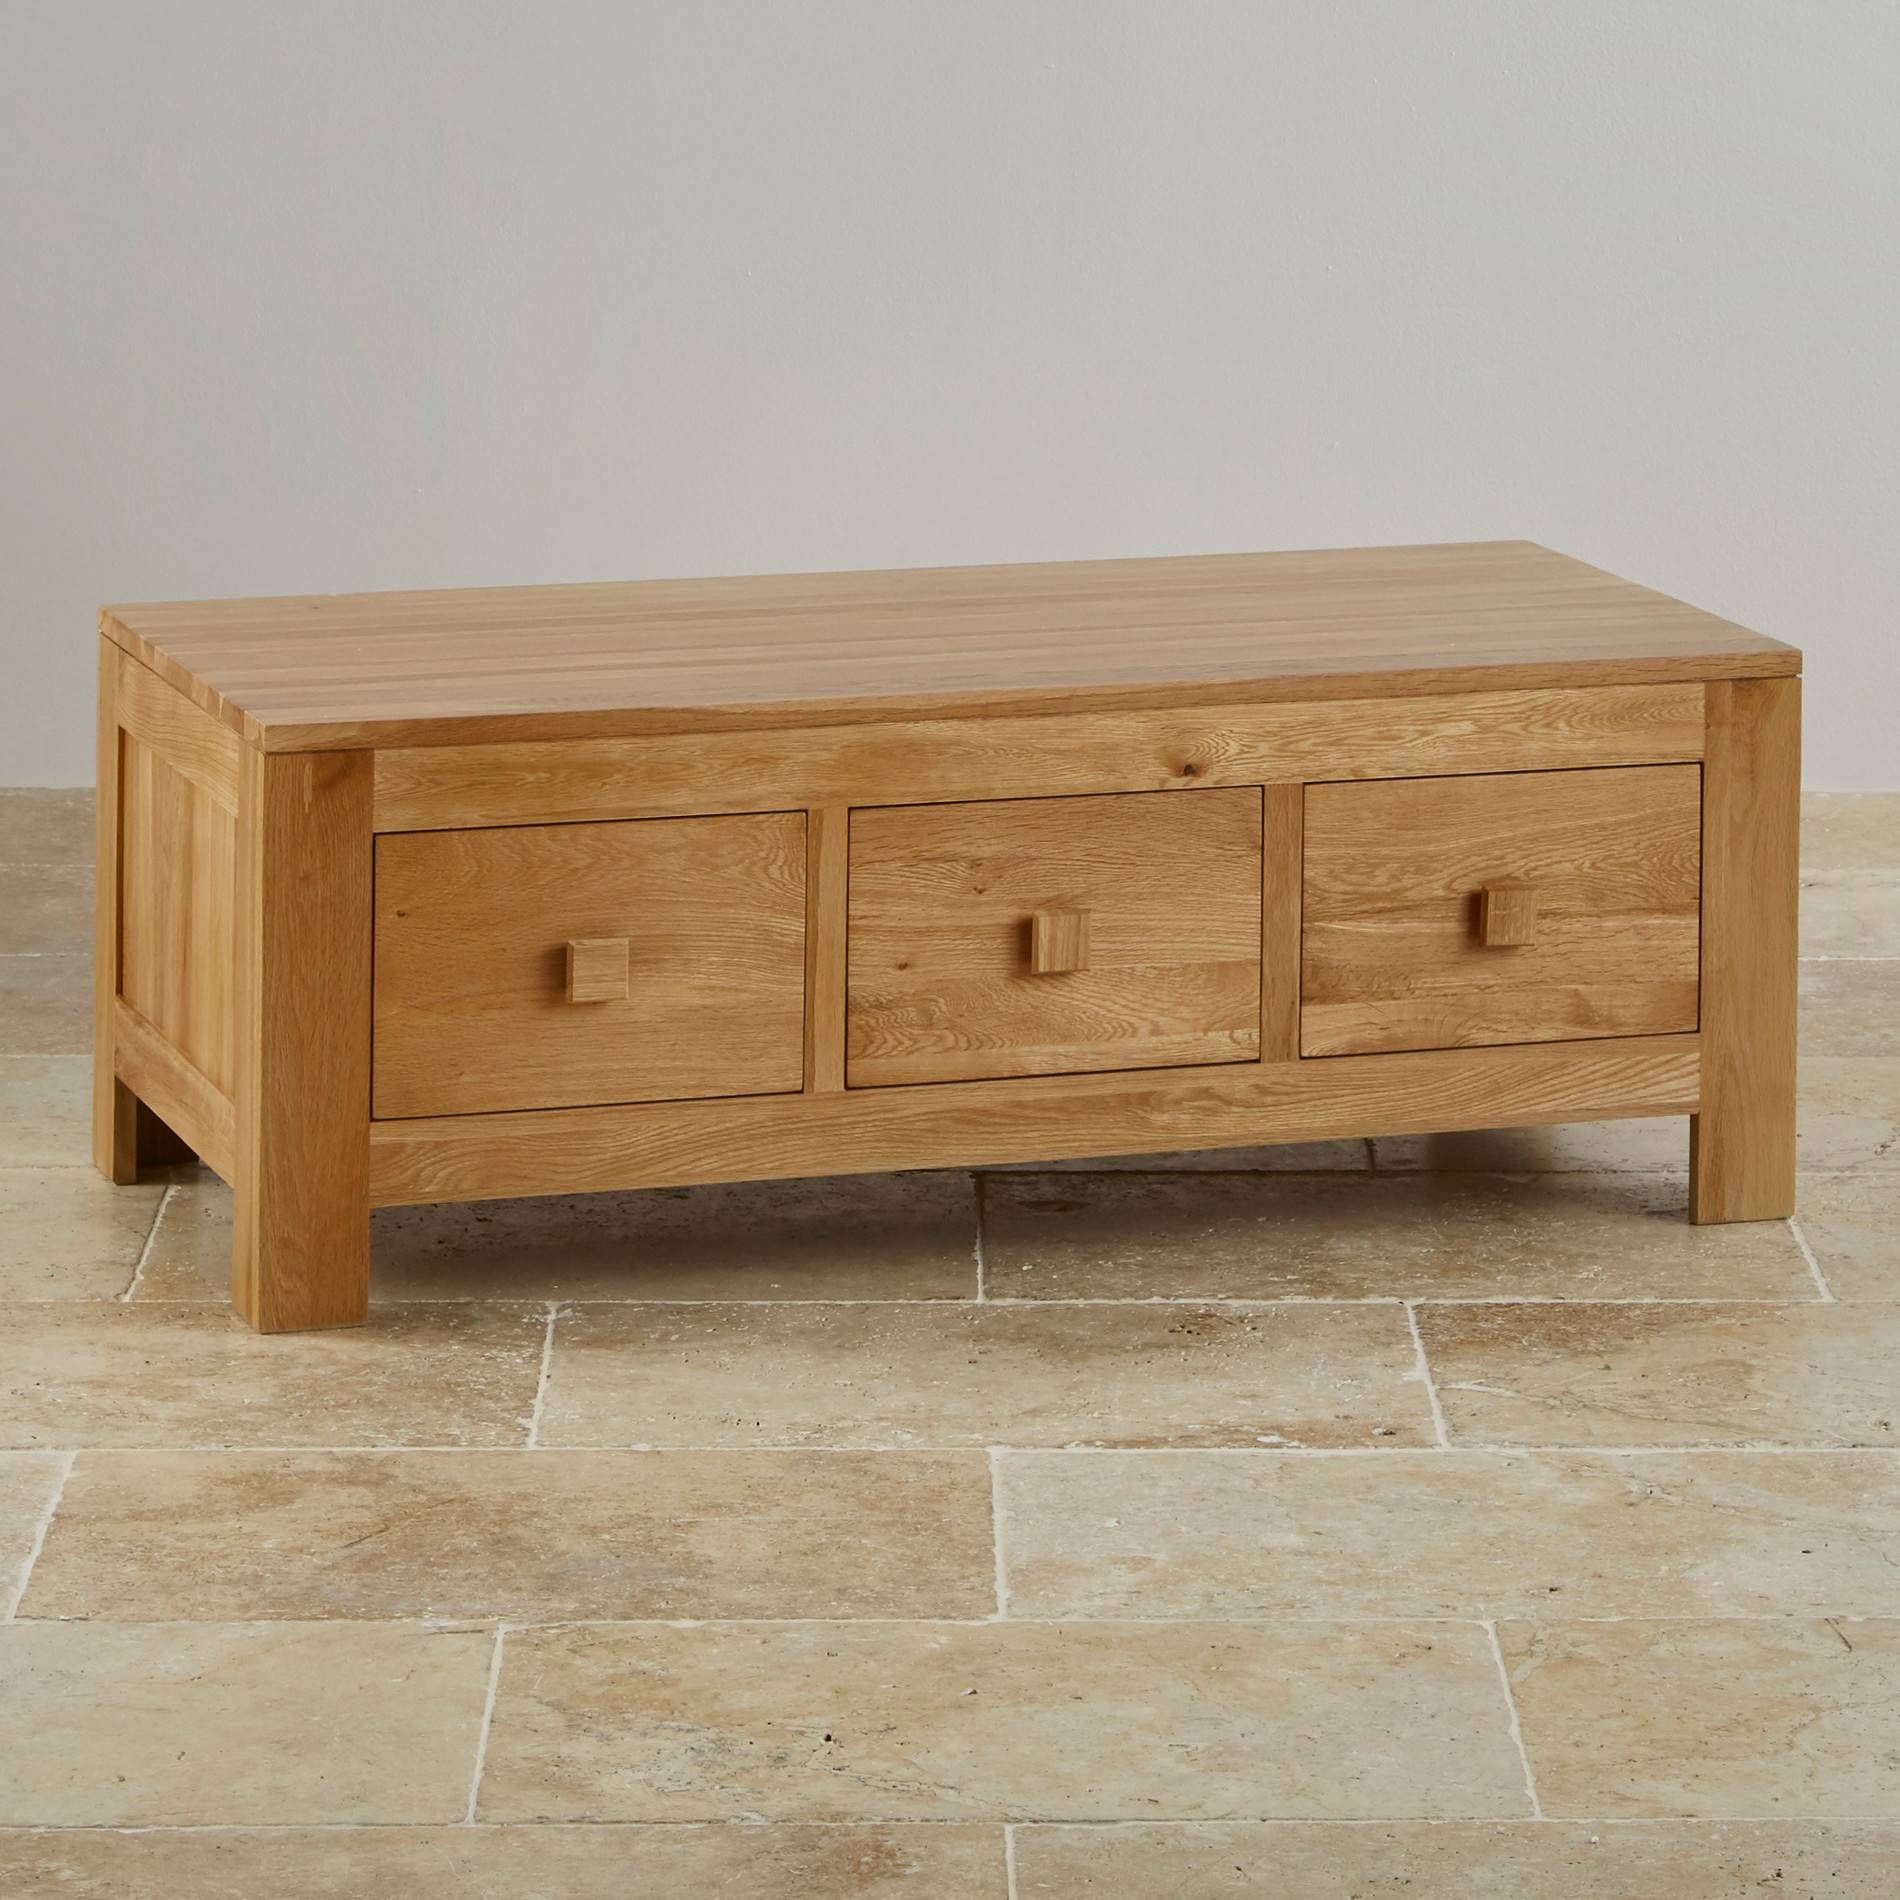 Oakdale 6 Drawer Coffee Table In Natural Solid Oak Inside Oak Coffee Table With Drawers (View 8 of 15)